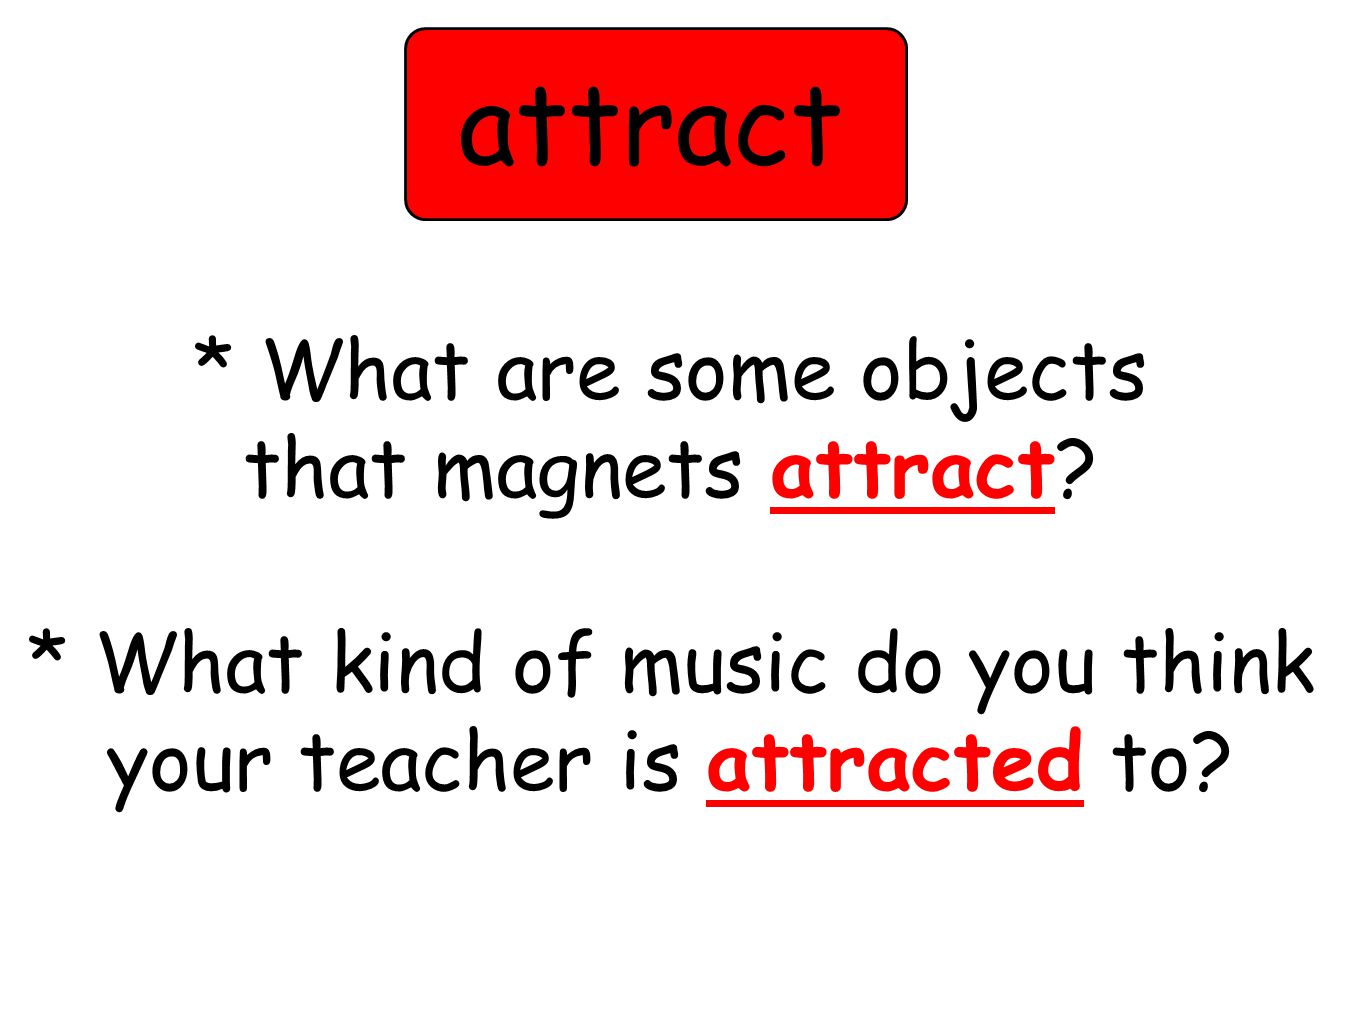 * What are some objects that magnets attract.